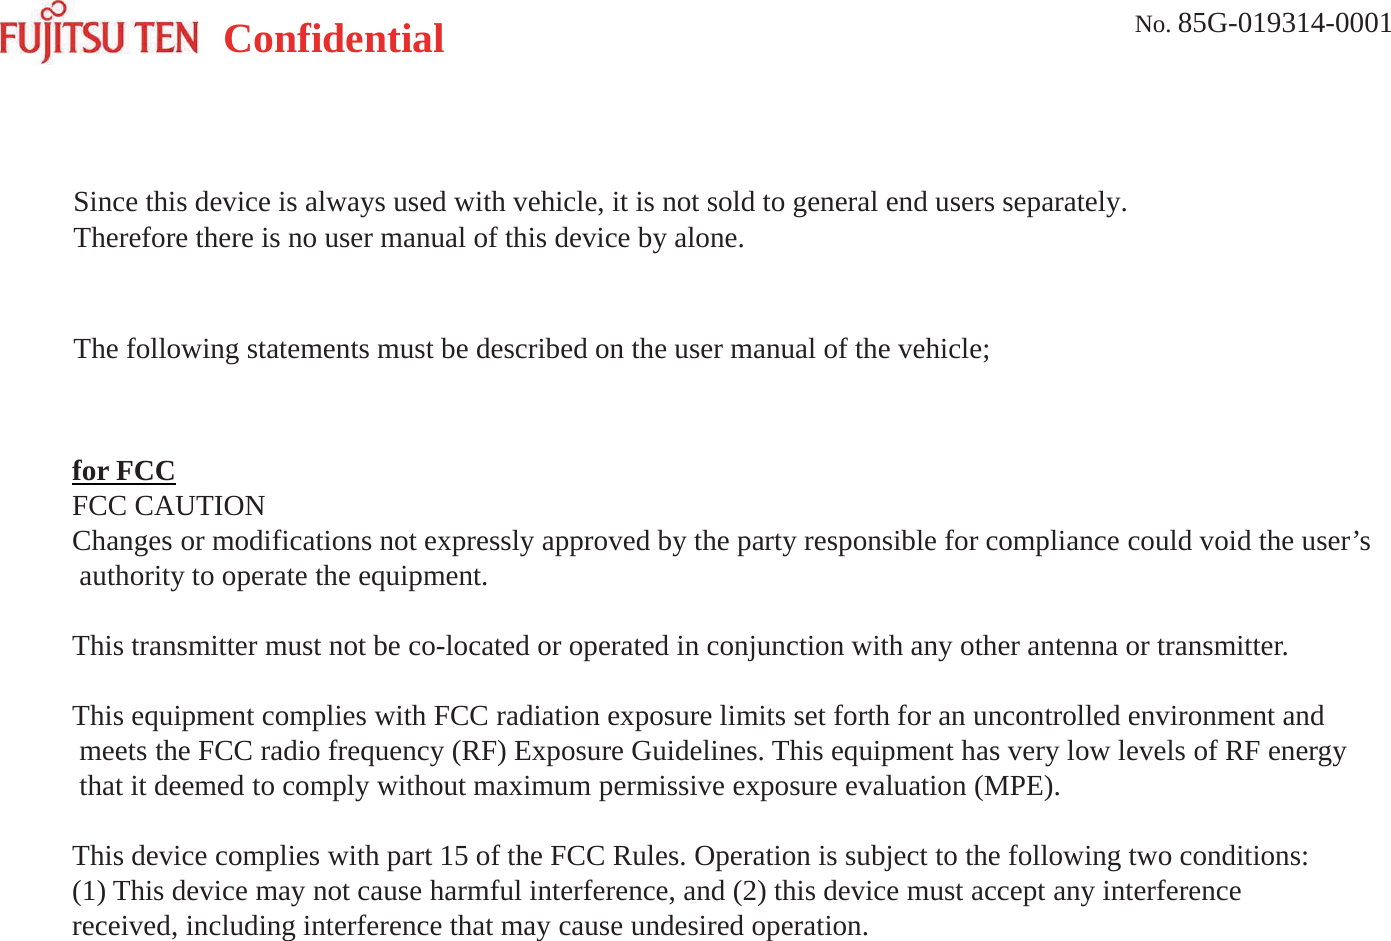 Confidential No. 85G-019314-0001PurposeMillimeter wave radar detects distance, relative velocity, and an angle with leading vehicle,a coming vehicle, etc by transmission and reception of an electromagnetic wave. Furthermore, it is usedfor one of adaptive cruise control and collision mitigation system in order to activate warning, brake system.Since this device is always used with vehicle, it is not sold to general end users separately. Therefore there isno user manual of this device by alone.for FCCFCC CAUTIONChanges or modifications not expressly approved by the party responsible for compliance could void the user’sauthority to operate the equipment.This transmitter must not be co-located or operated in conjunction with any other antenna or transmitter.This equipment complies with FCC radiation exposure limits set forth for an uncontrolled environment andmeets the FCC radio frequency (RF) Exposure Guidelines. This equipment has very low levels of RF energythat it deemed to comply without maximum permissive exposure evaluation (MPE).This device complies with part 15 of the FCC Rules. Operation is subject to the following two conditions:(1) This device may not cause harmful interference, and (2) this device must accept any interferencereceived, including interference that may cause undesired operation.User ManualSince this device is always used with vehicle, it is not sold to general end users separately. Therefore there is no user manual of this device by alone.The following statements must be described on the user manual of the vehicle;